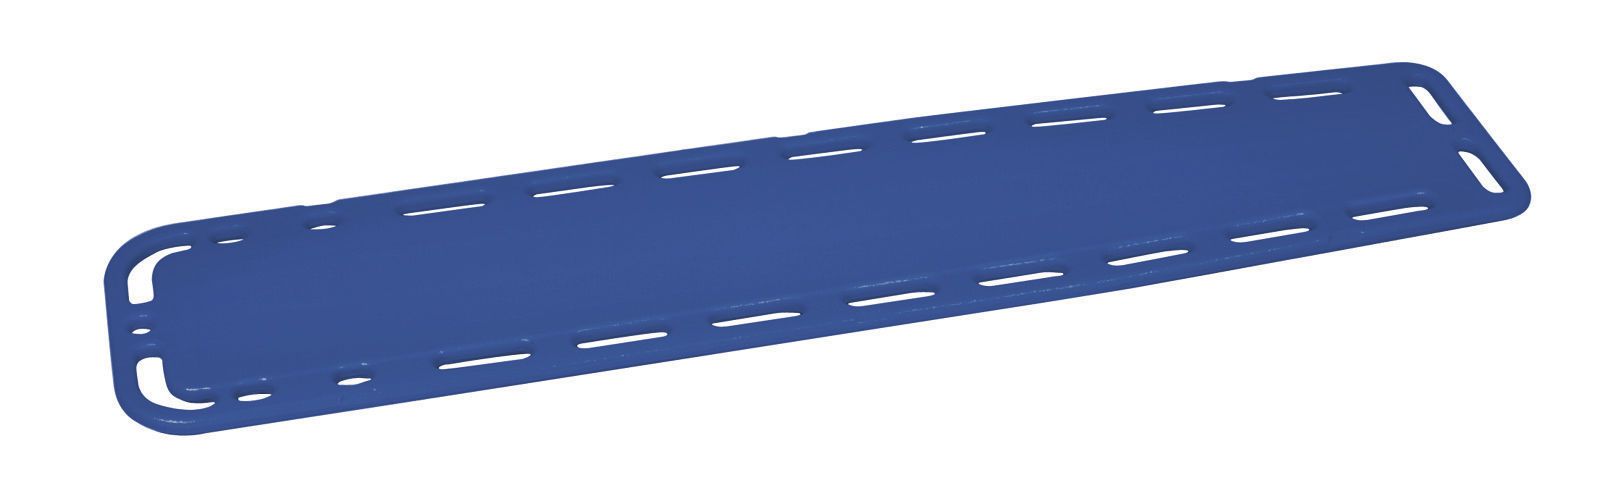 Adult spinal board / plastic Galaxy 9015 ME.BER